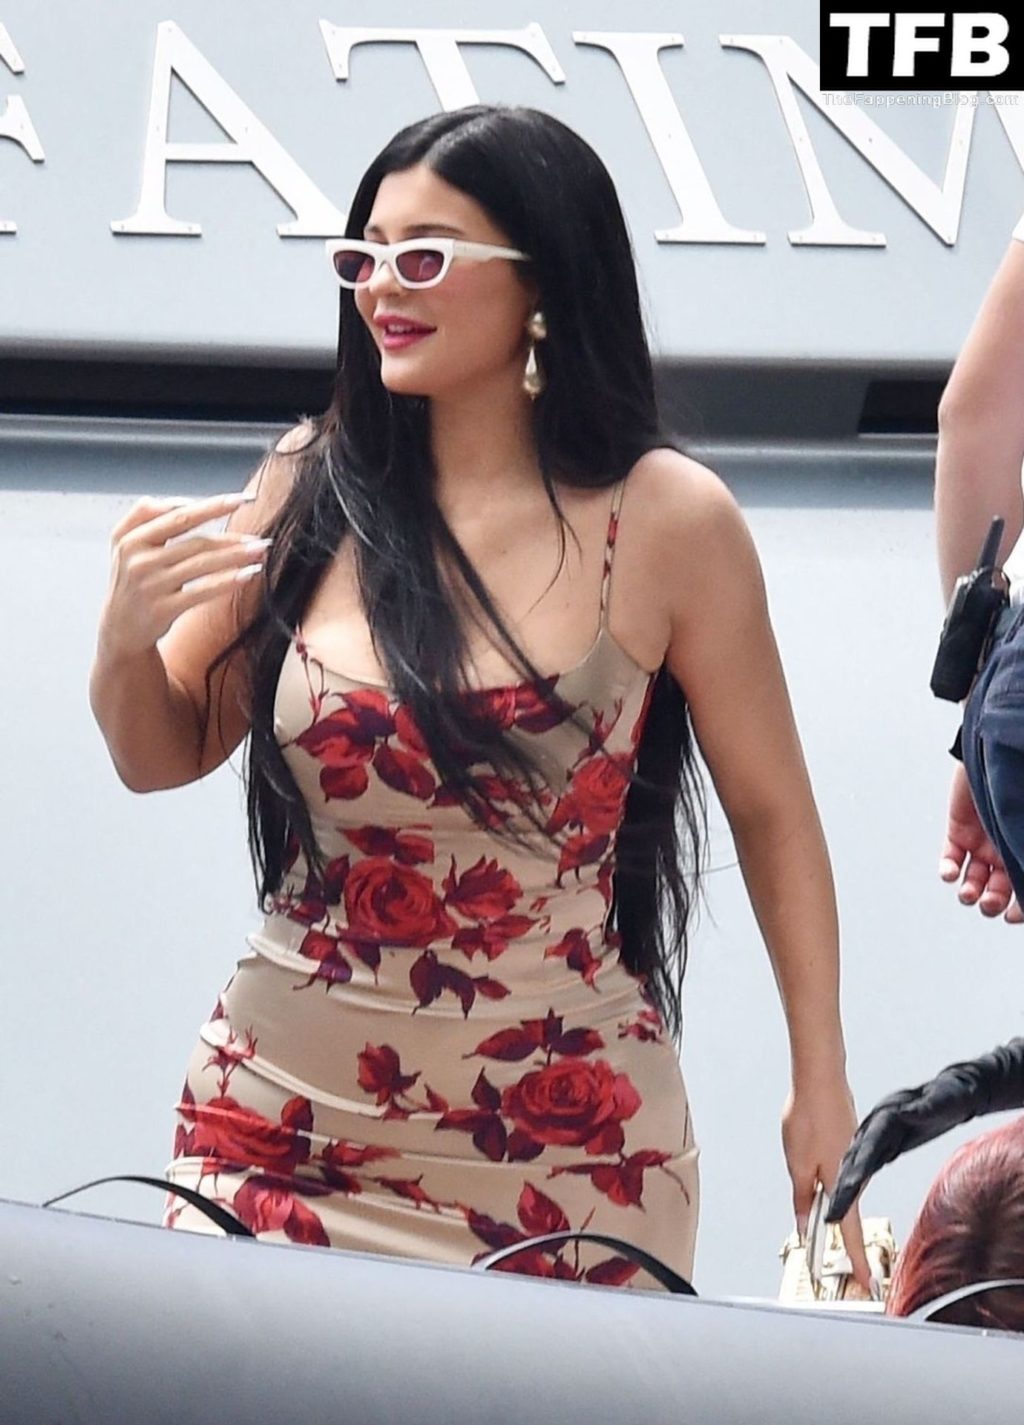 Kylie Jenner Sexy The Fappening Blog 3 1024x1425 - Kylie Jenner Flaunts Her Curves in Portofino (32 Photos)